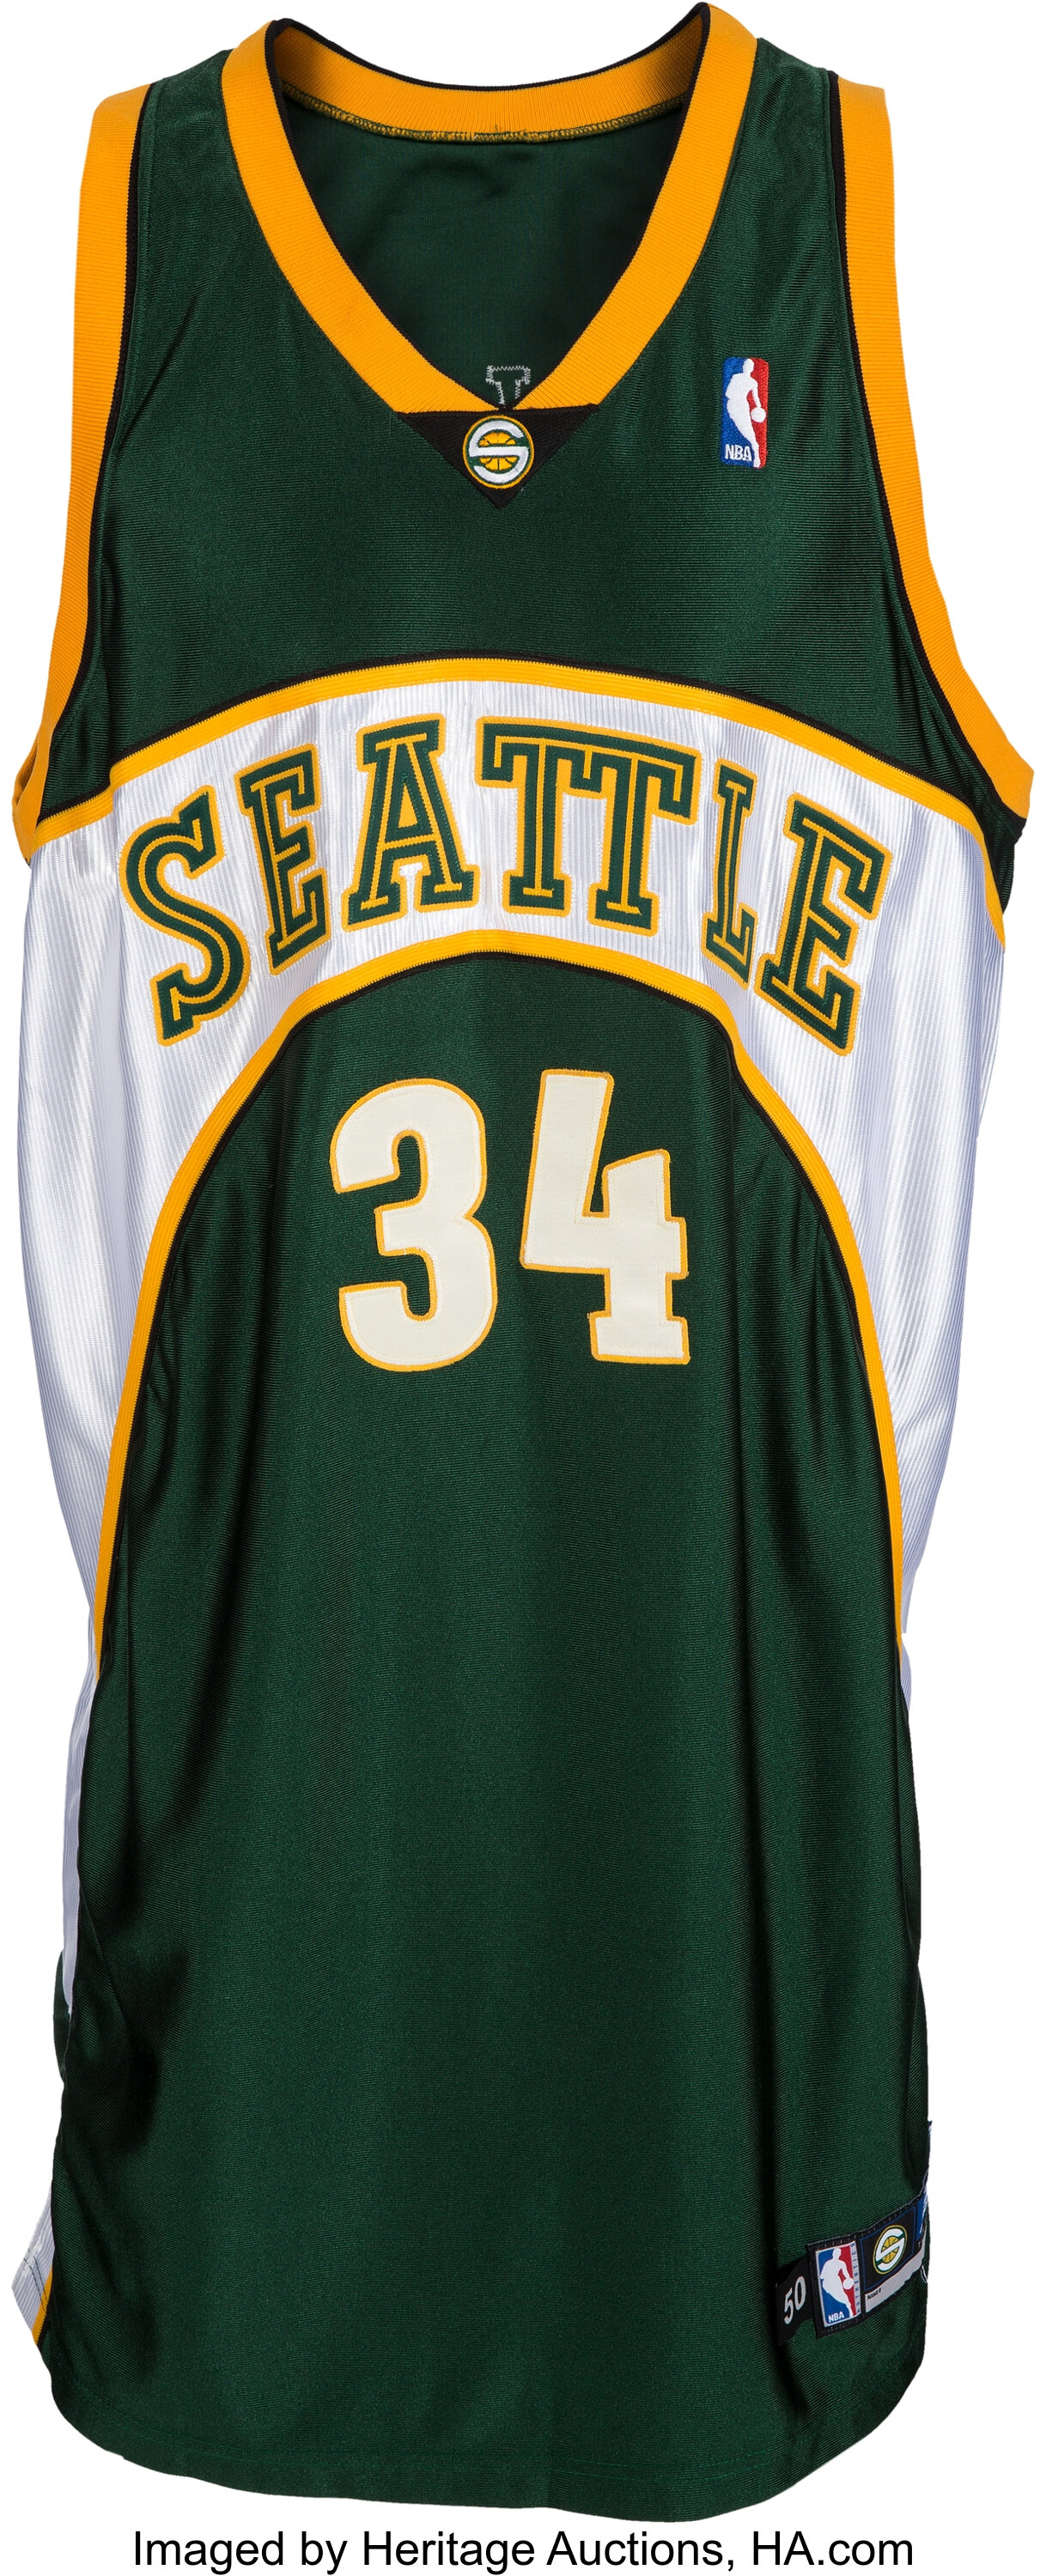 Alternate History: What if Ray Allen is not traded by the Seattle  Supersonics - Welcome to Loud City